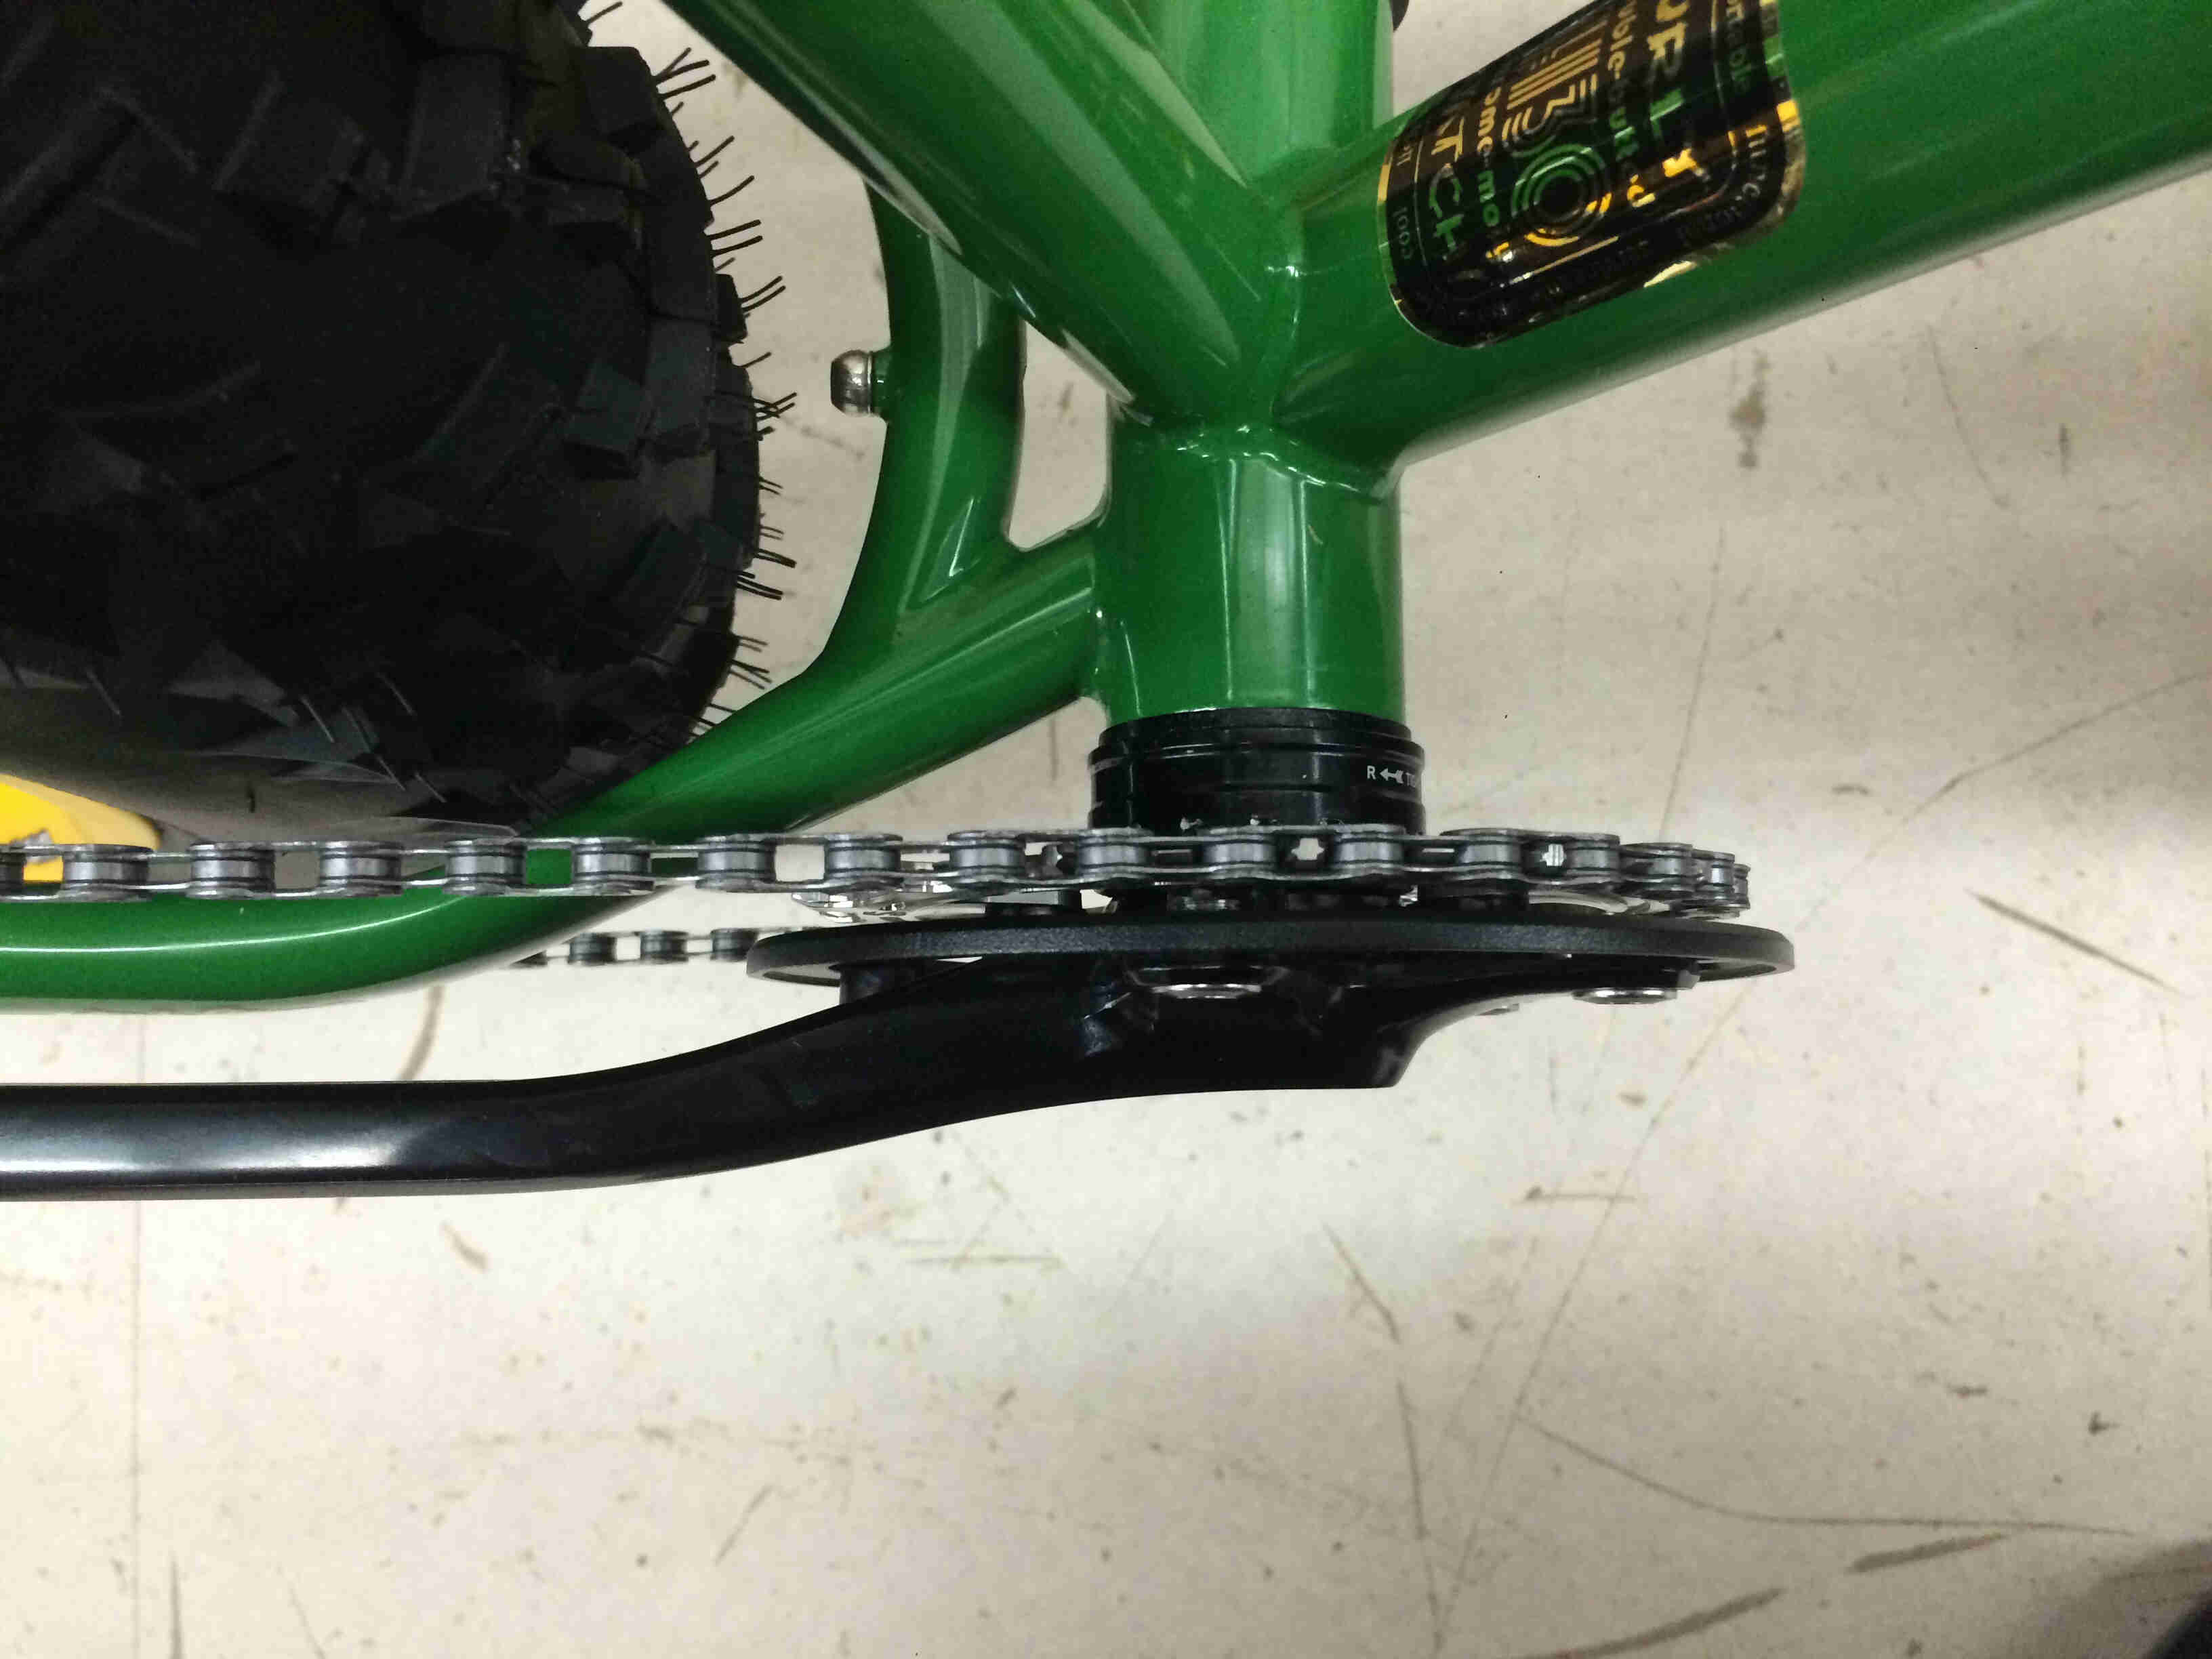 Close up, downward view of the crank and chainring of a green Surly Moonlander bike